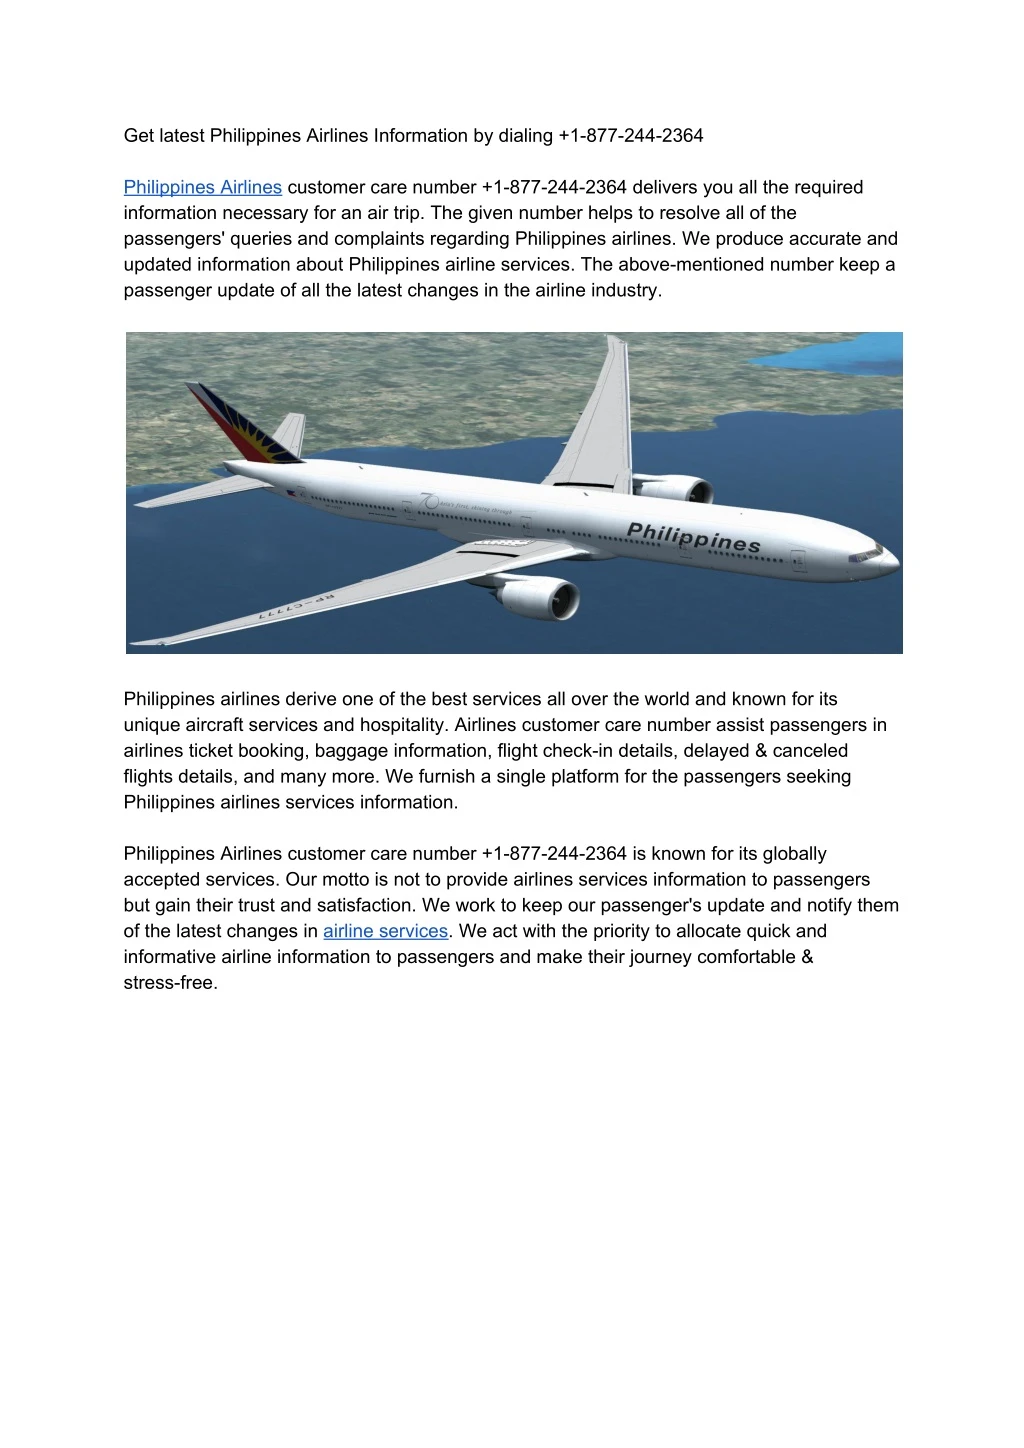 get latest philippines airlines information